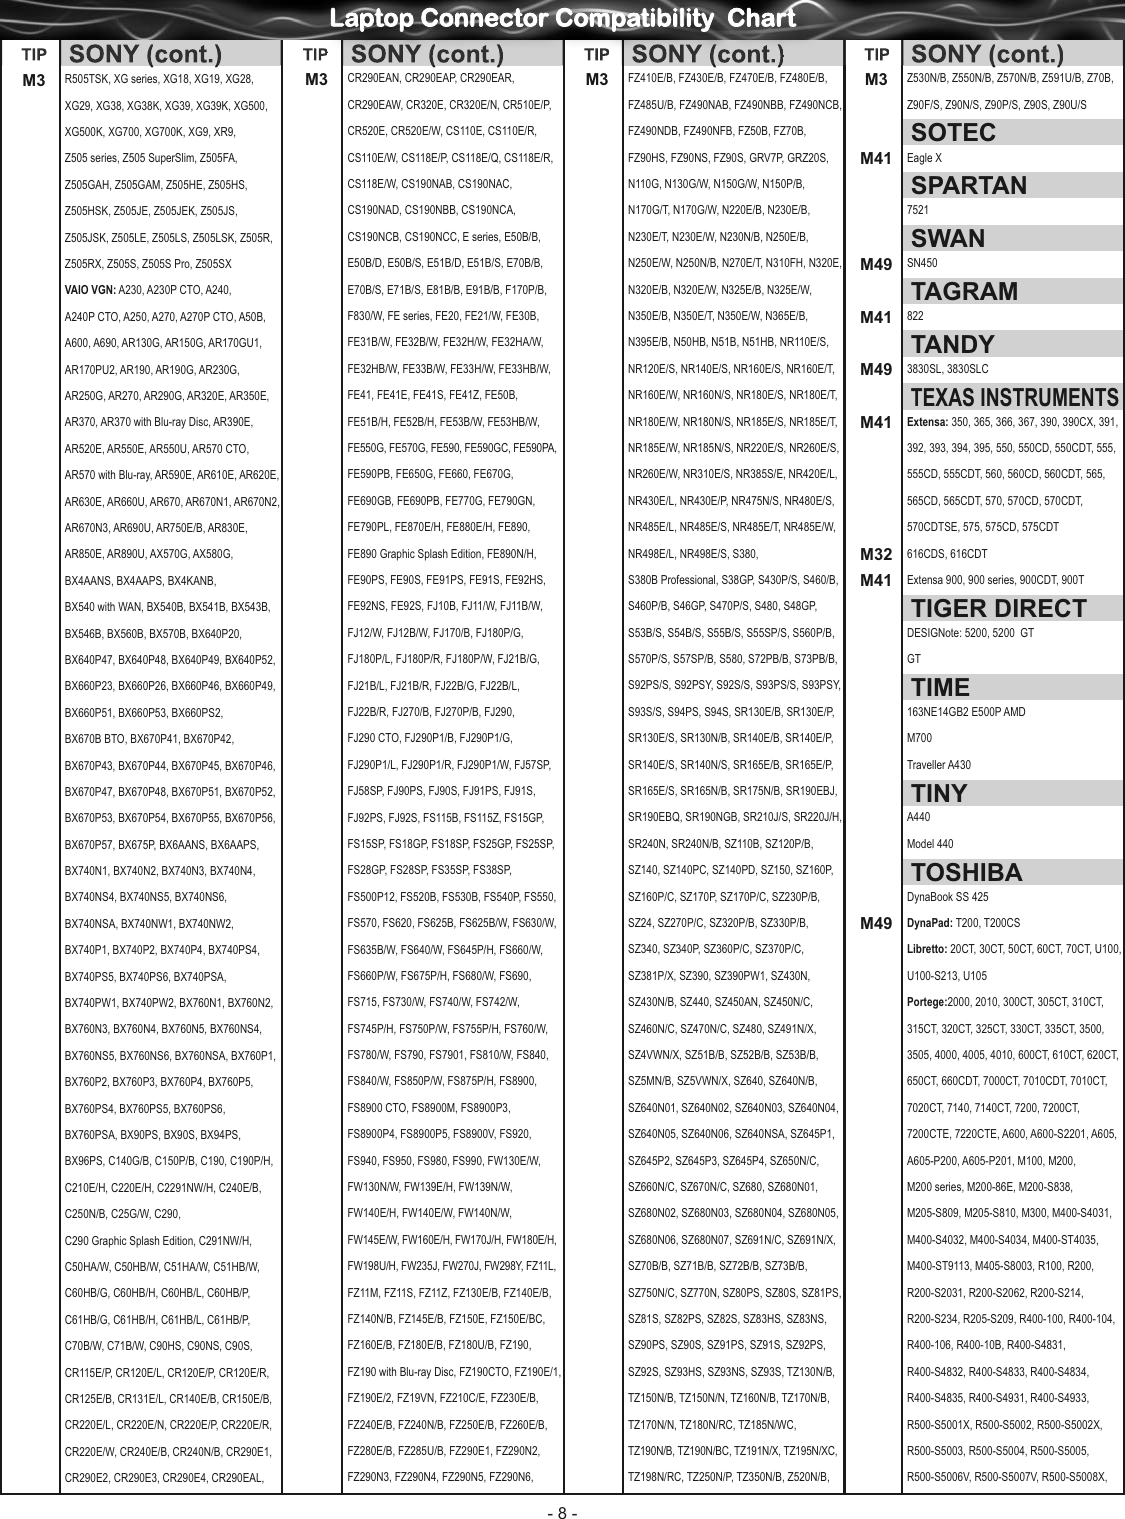 Page 8 of 10 - Rocket-Fish Rocket-Fish-Rf-Bprac2-Users-Manual- AC-5001BB_Connector_Compatibility_Chart_20090403_2  Rocket-fish-rf-bprac2-users-manual